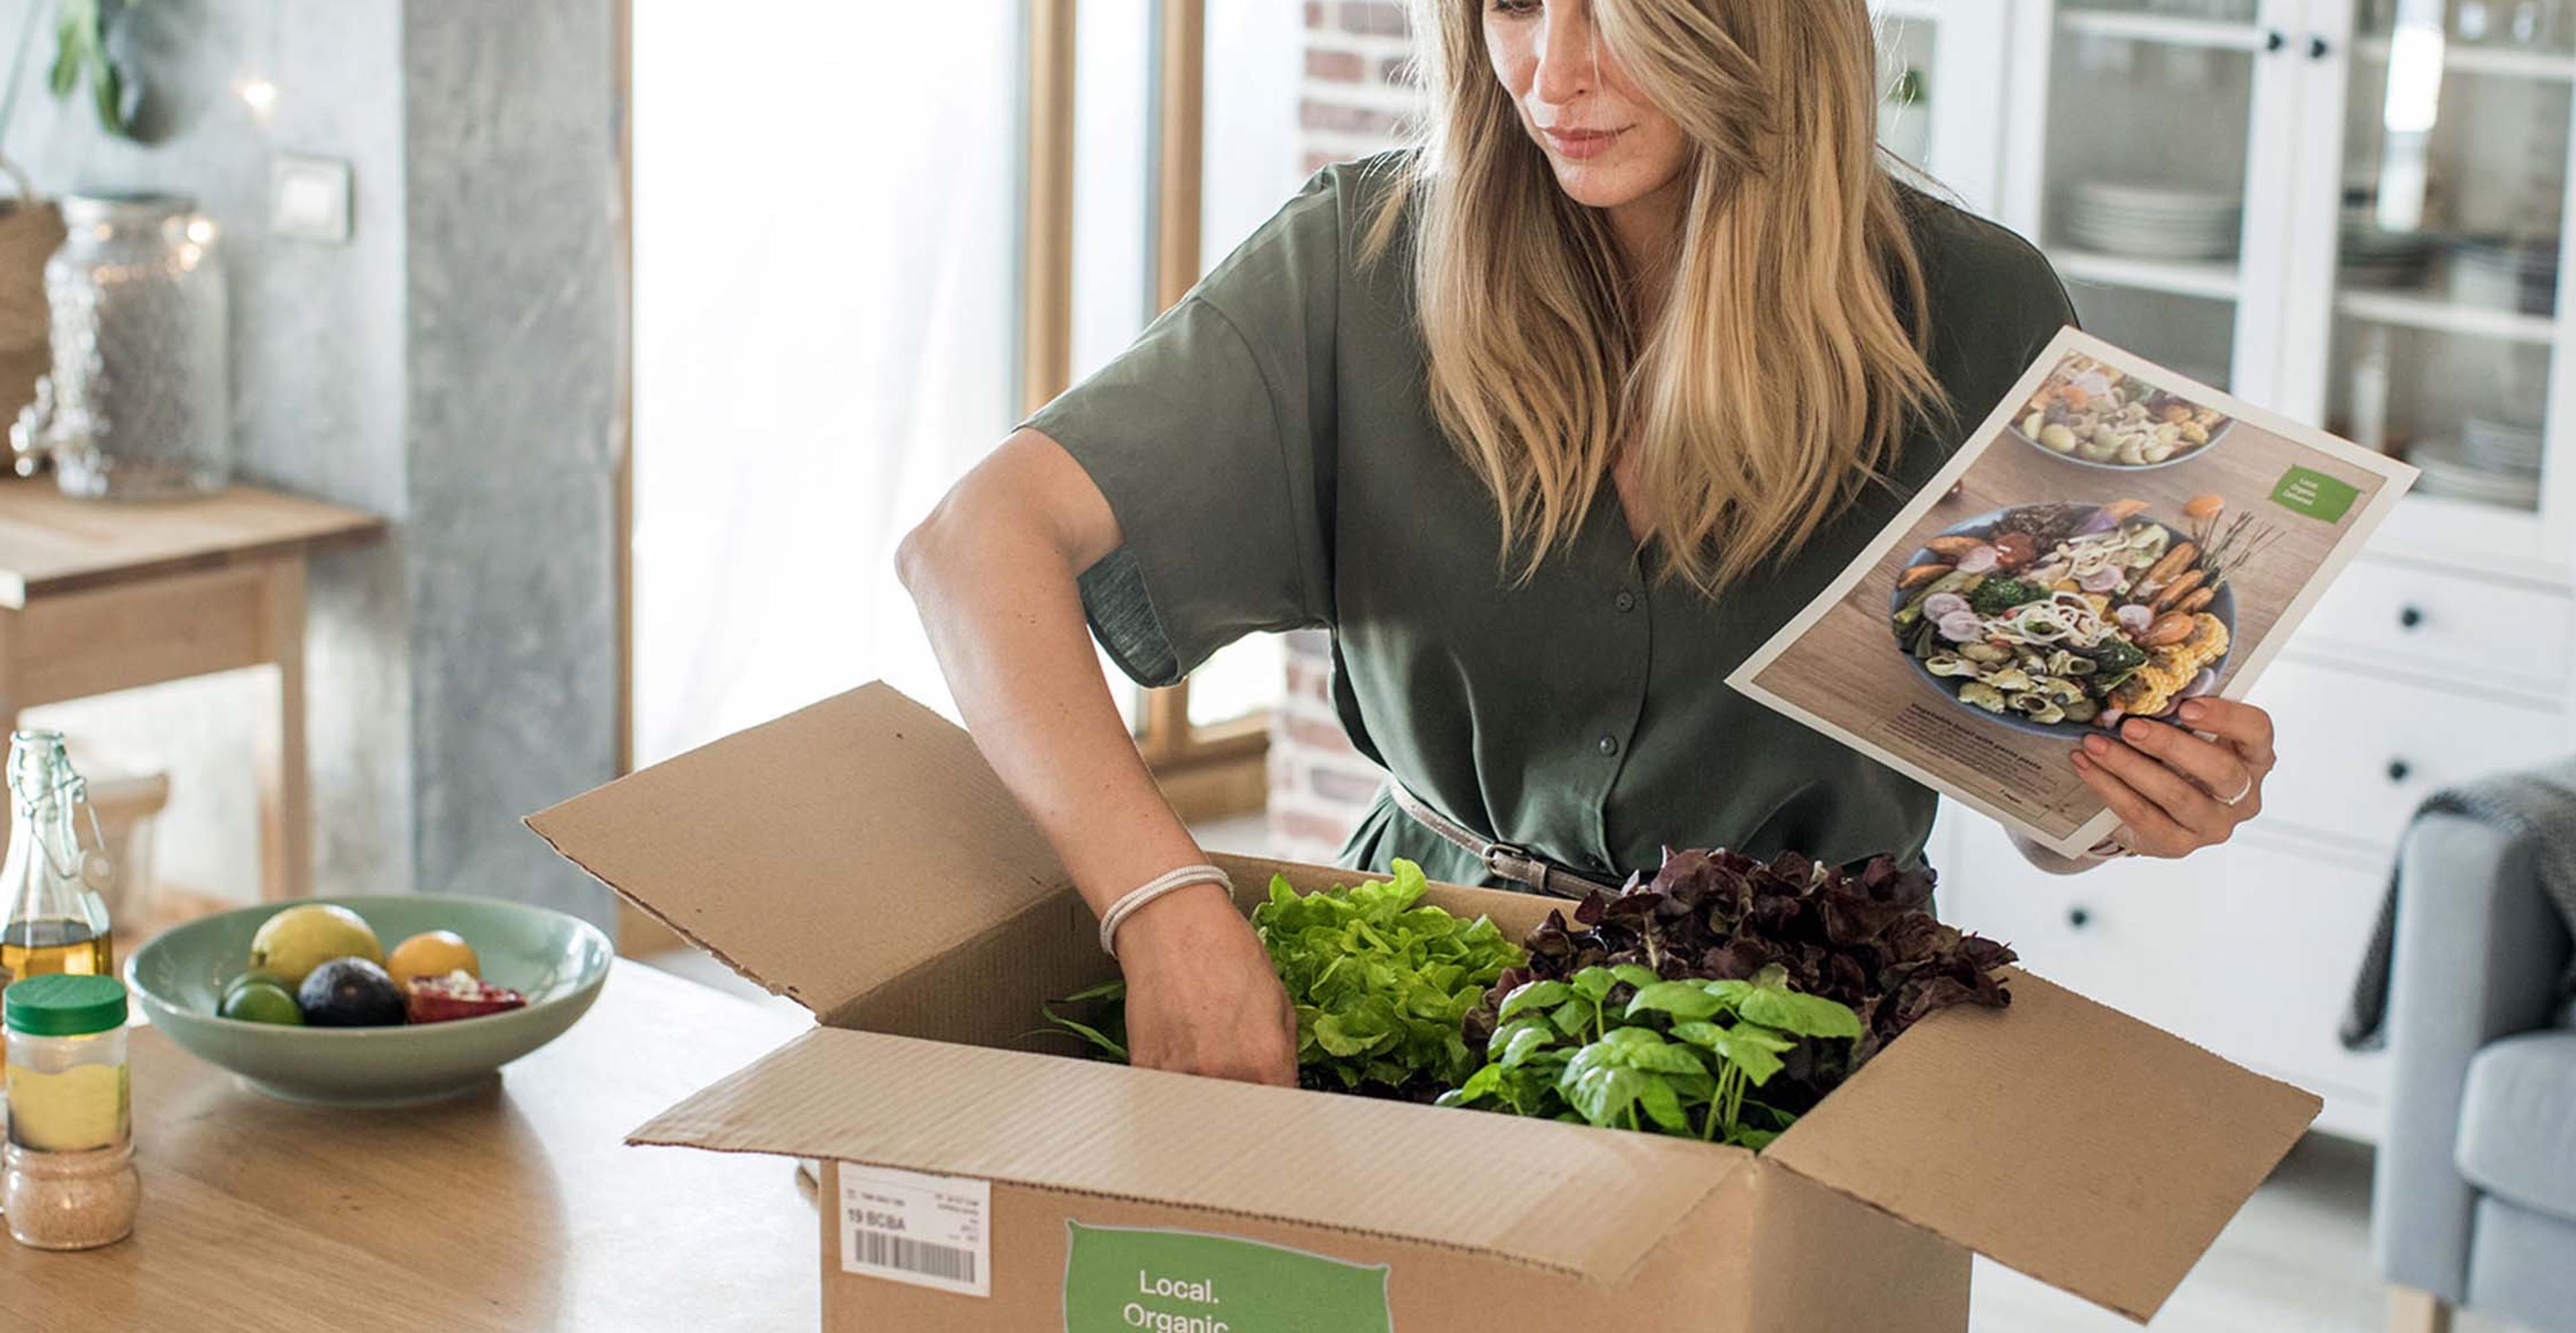 A person unboxing a box filled with produce